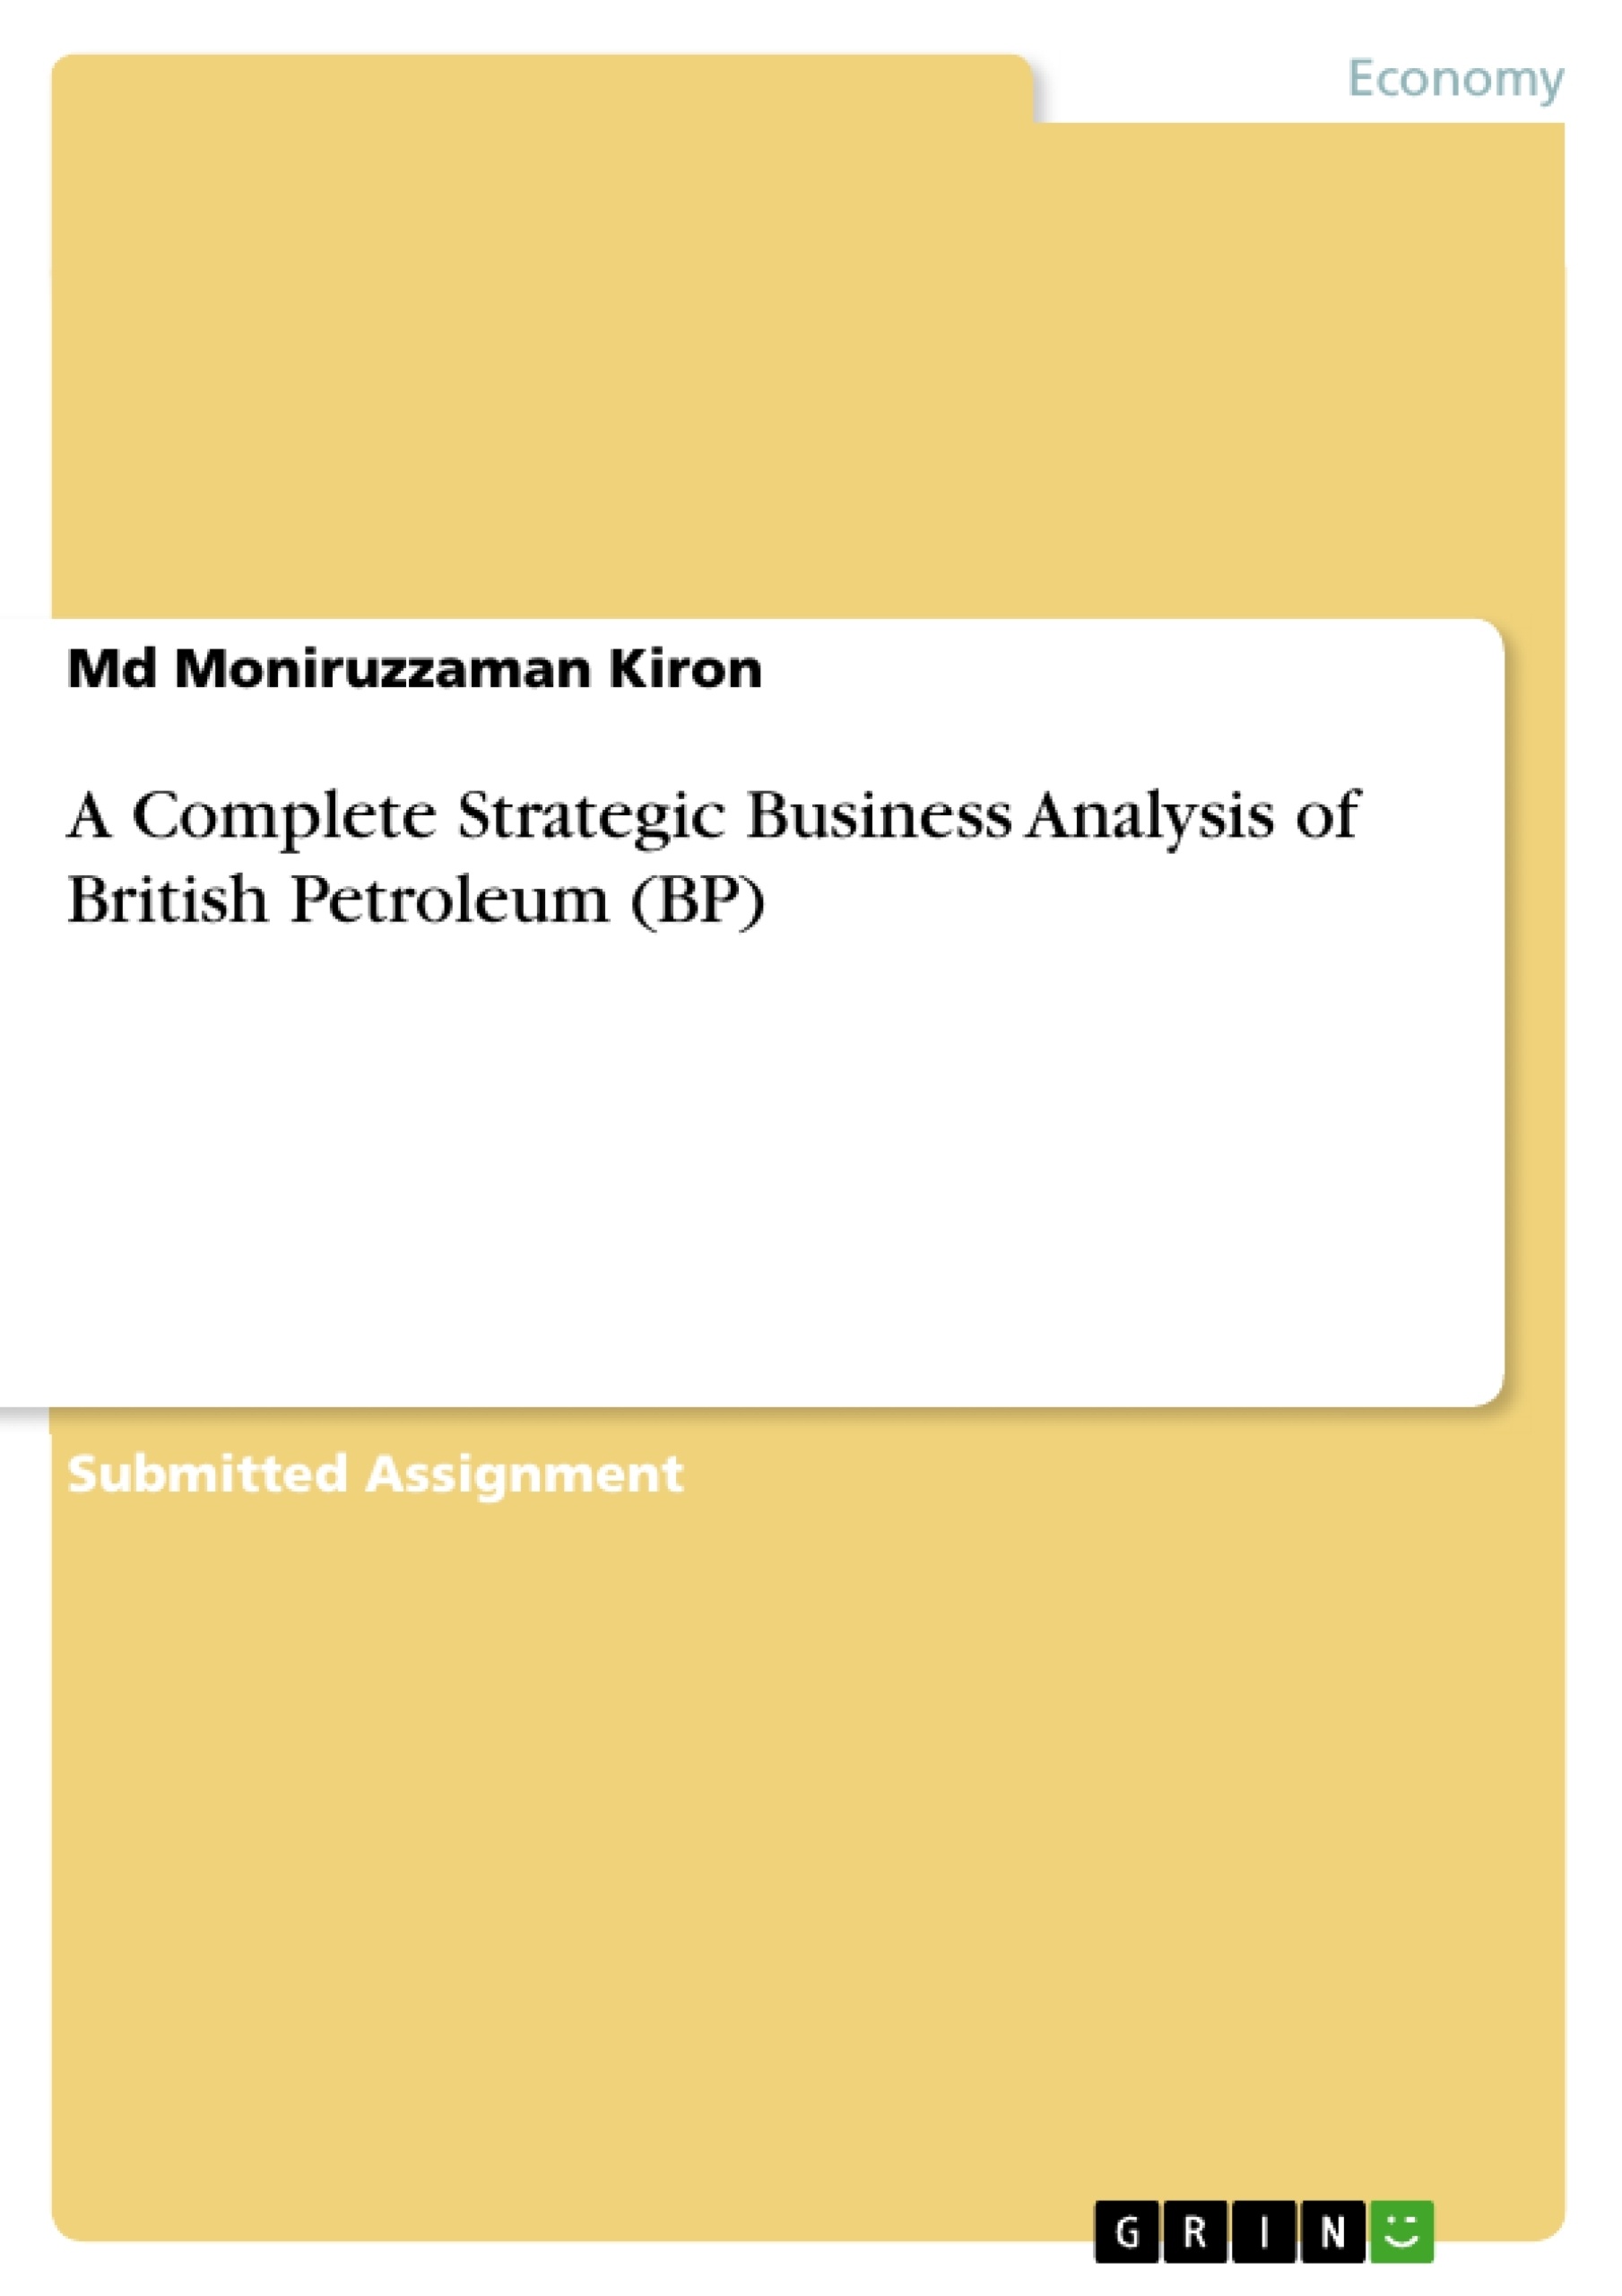 Title: A Complete Strategic Business Analysis of British Petroleum (BP)